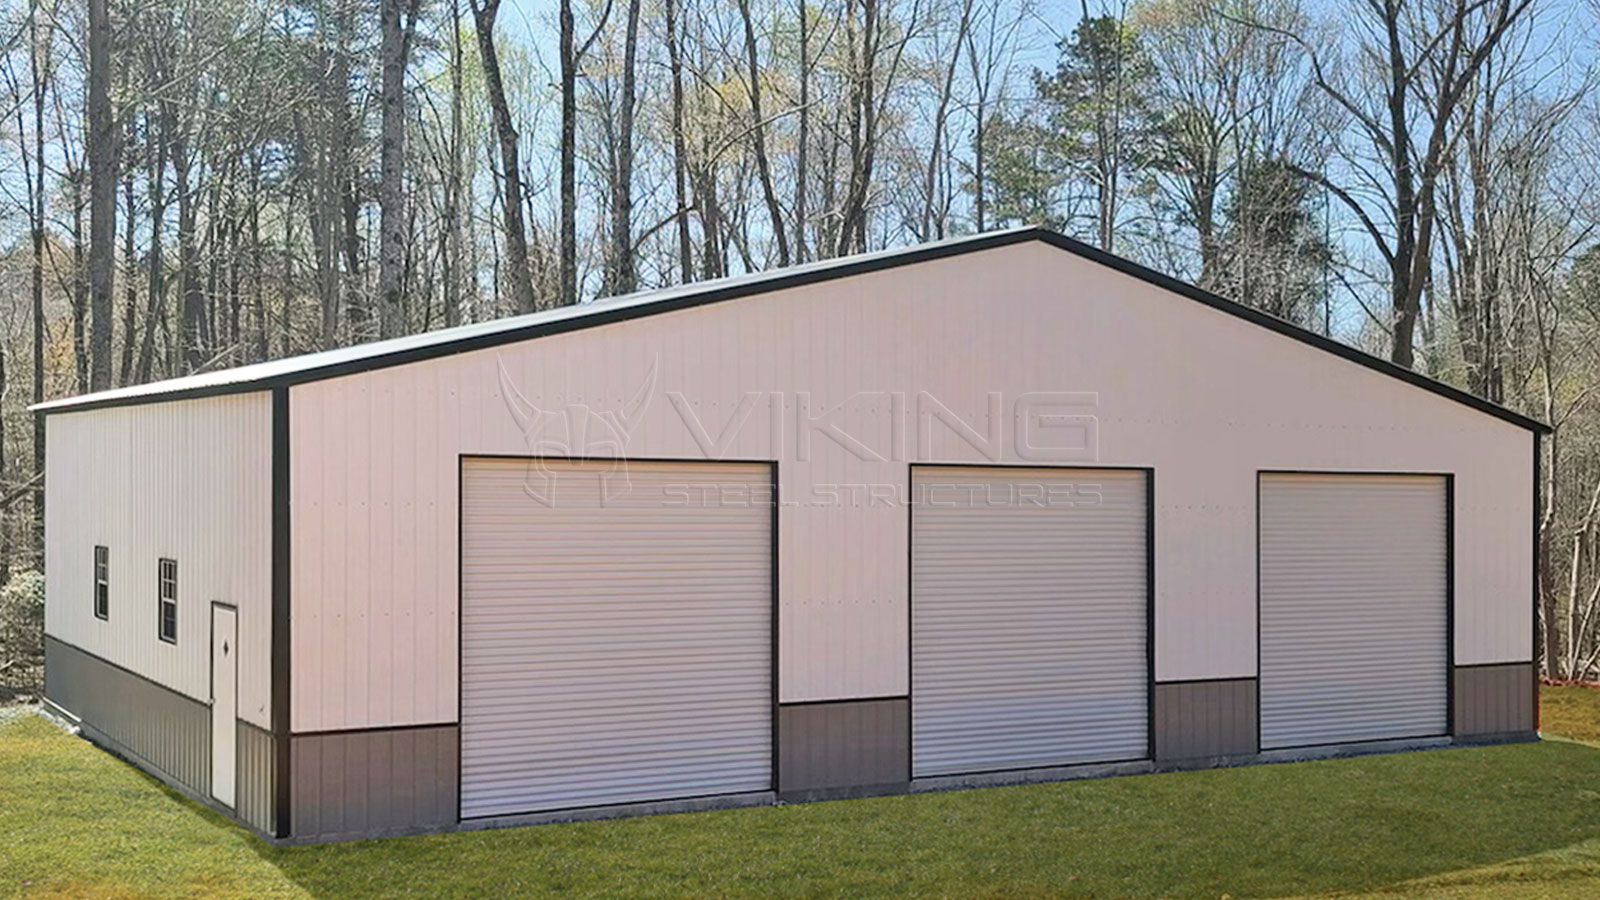 48x32x14 Commercial Garage Building Front View